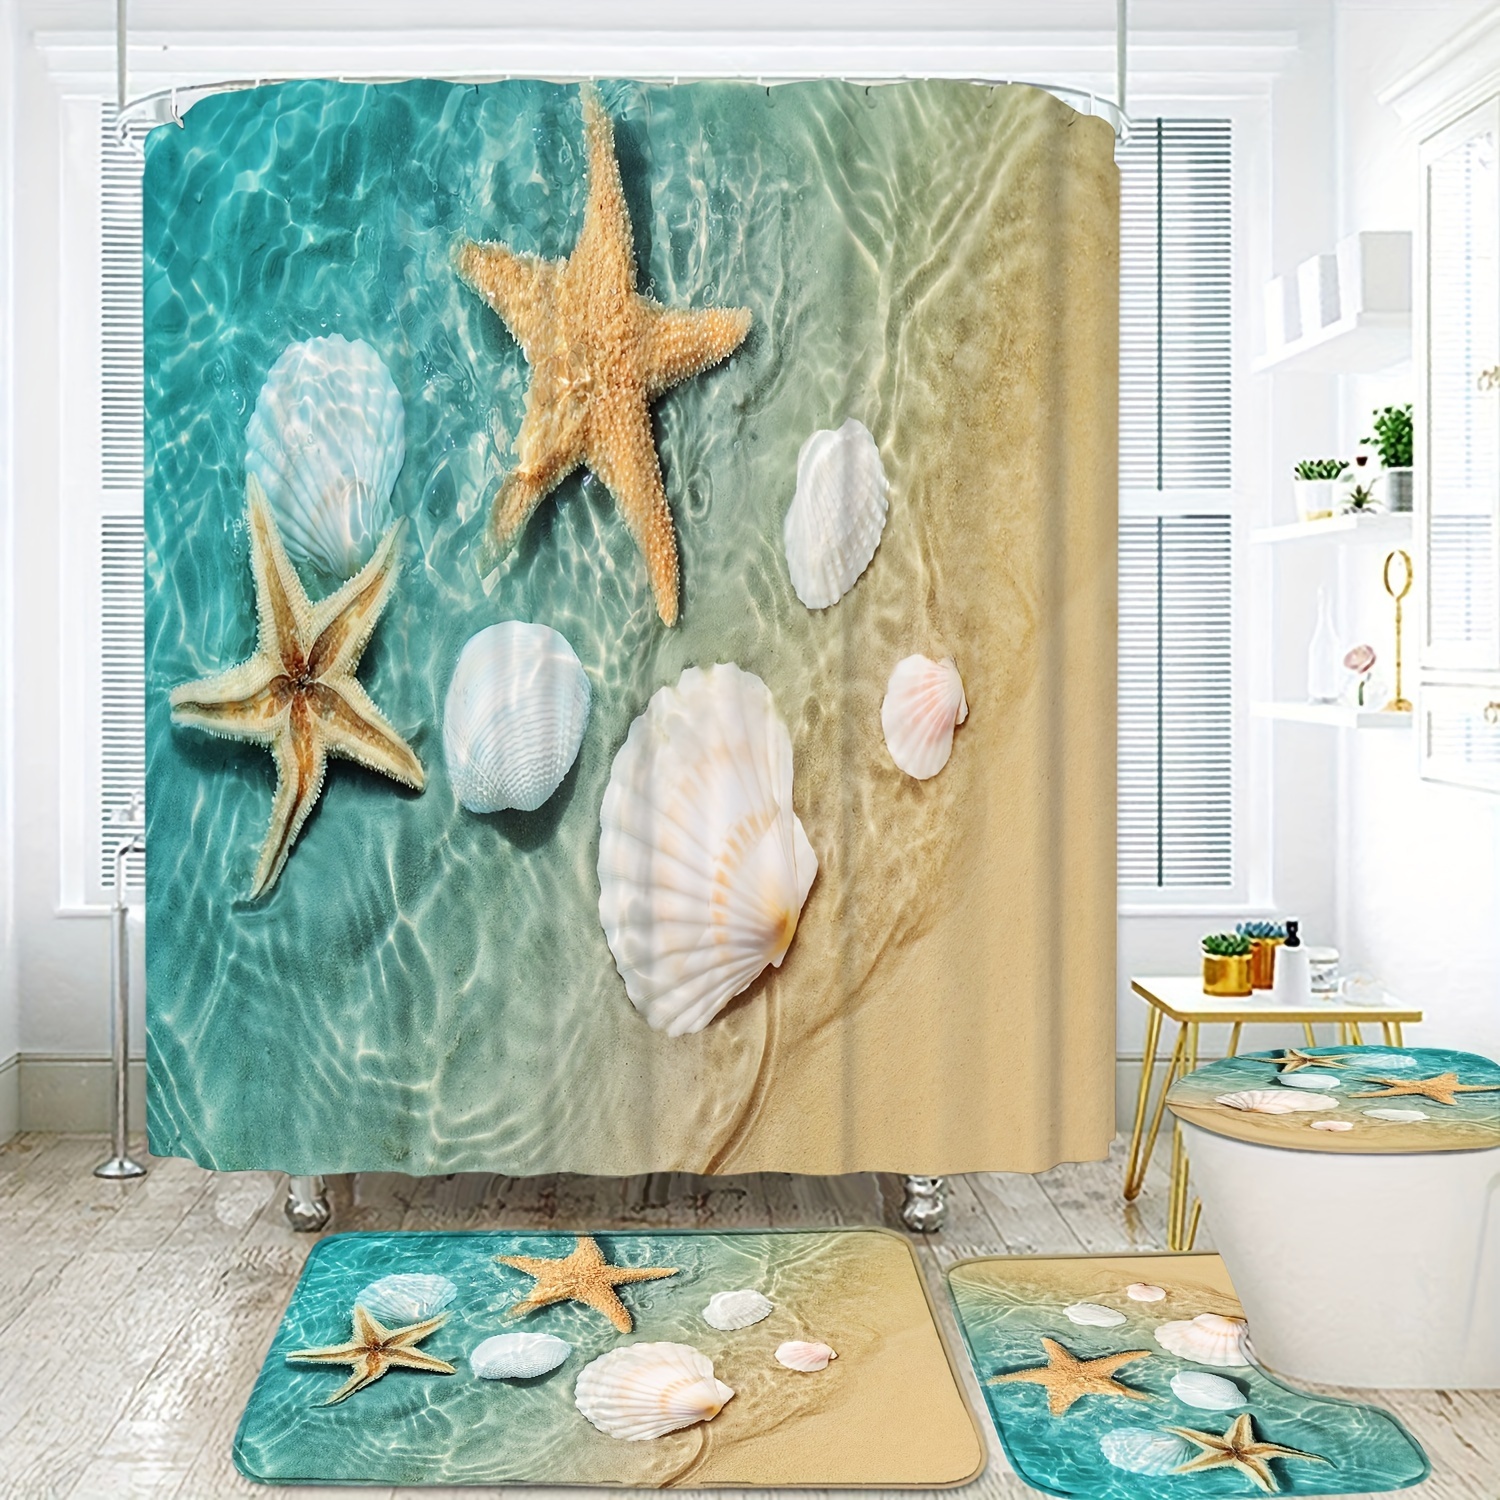 

4pcs Beach Shell Starfish Printed Shower Curtain Set, Waterproof Shower Curtain With 12 Hooks, Non-slip Rug, Toilet Lid Cover Pad And U-shaped Mat, Bathroom Accessories, Home Bathroom Decor